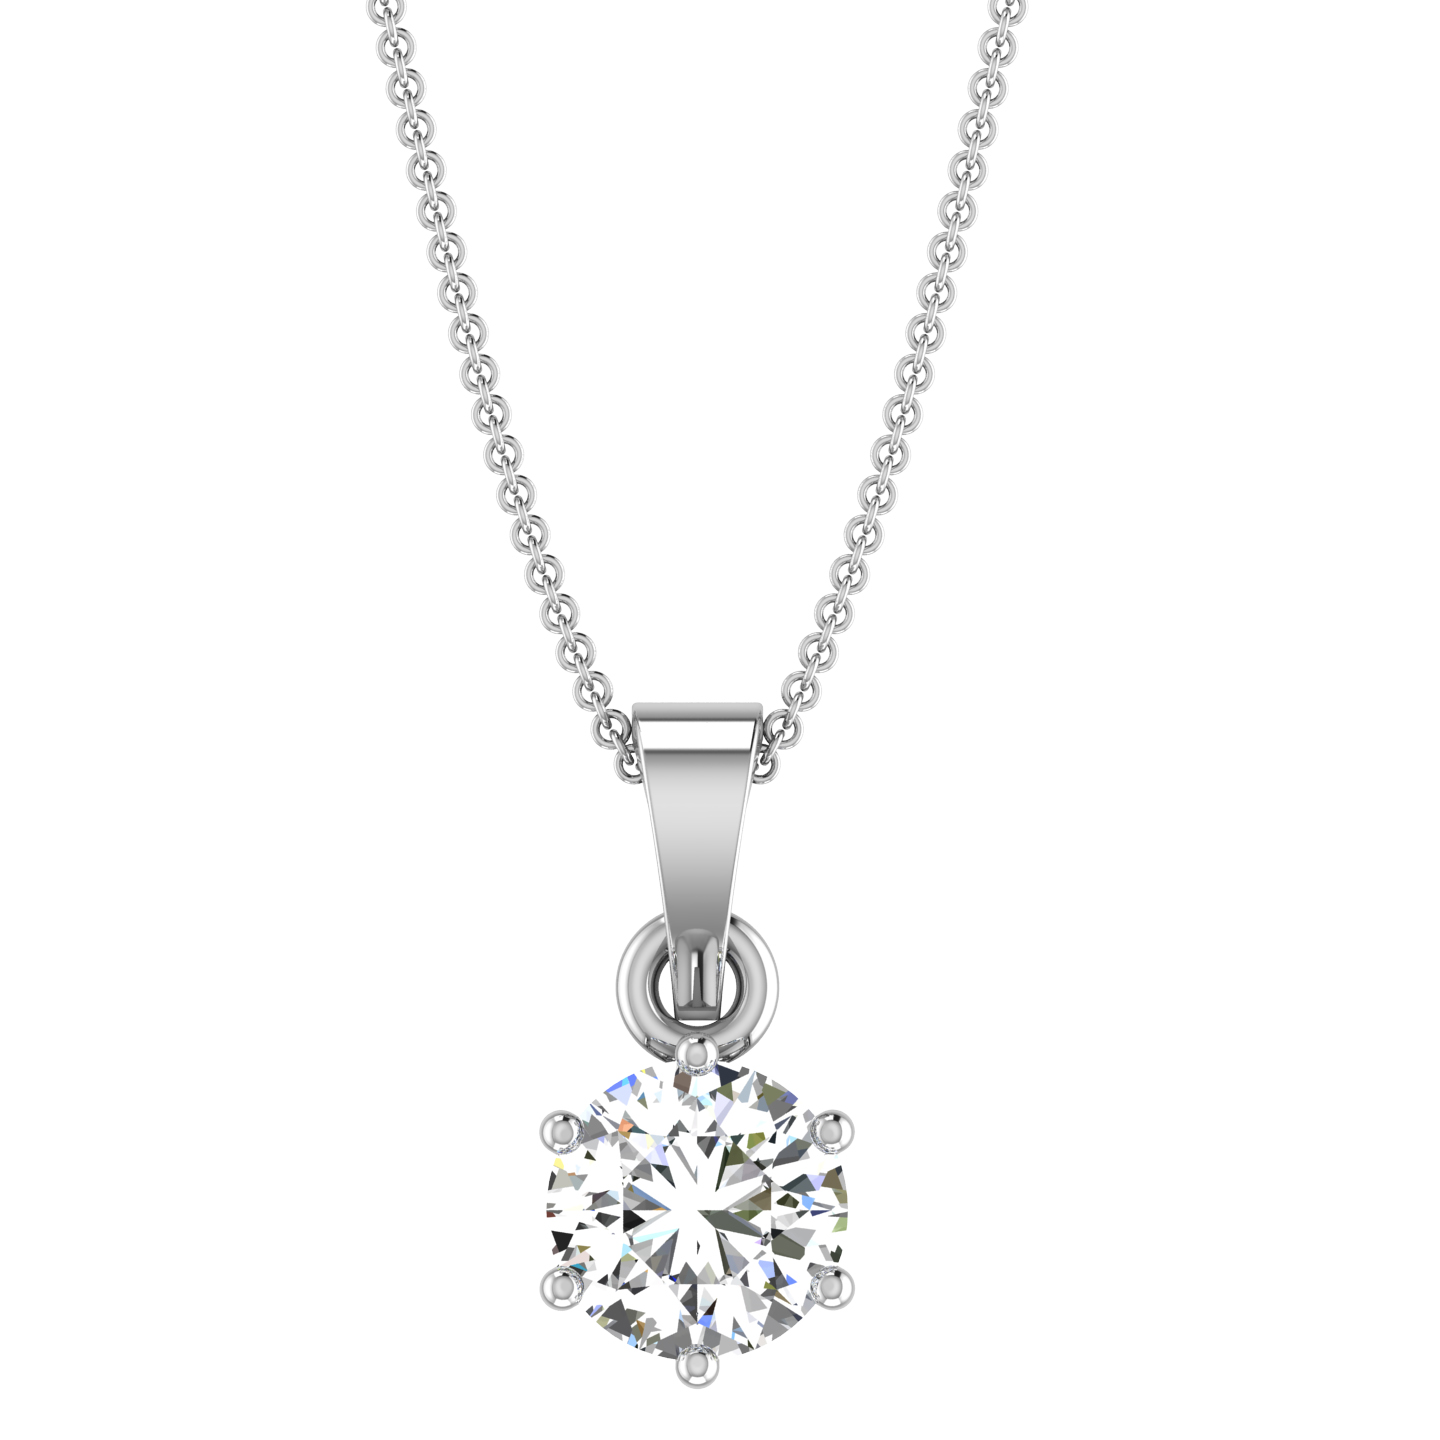 Differences between a necklace and a pendant - Royal Coster Diamonds